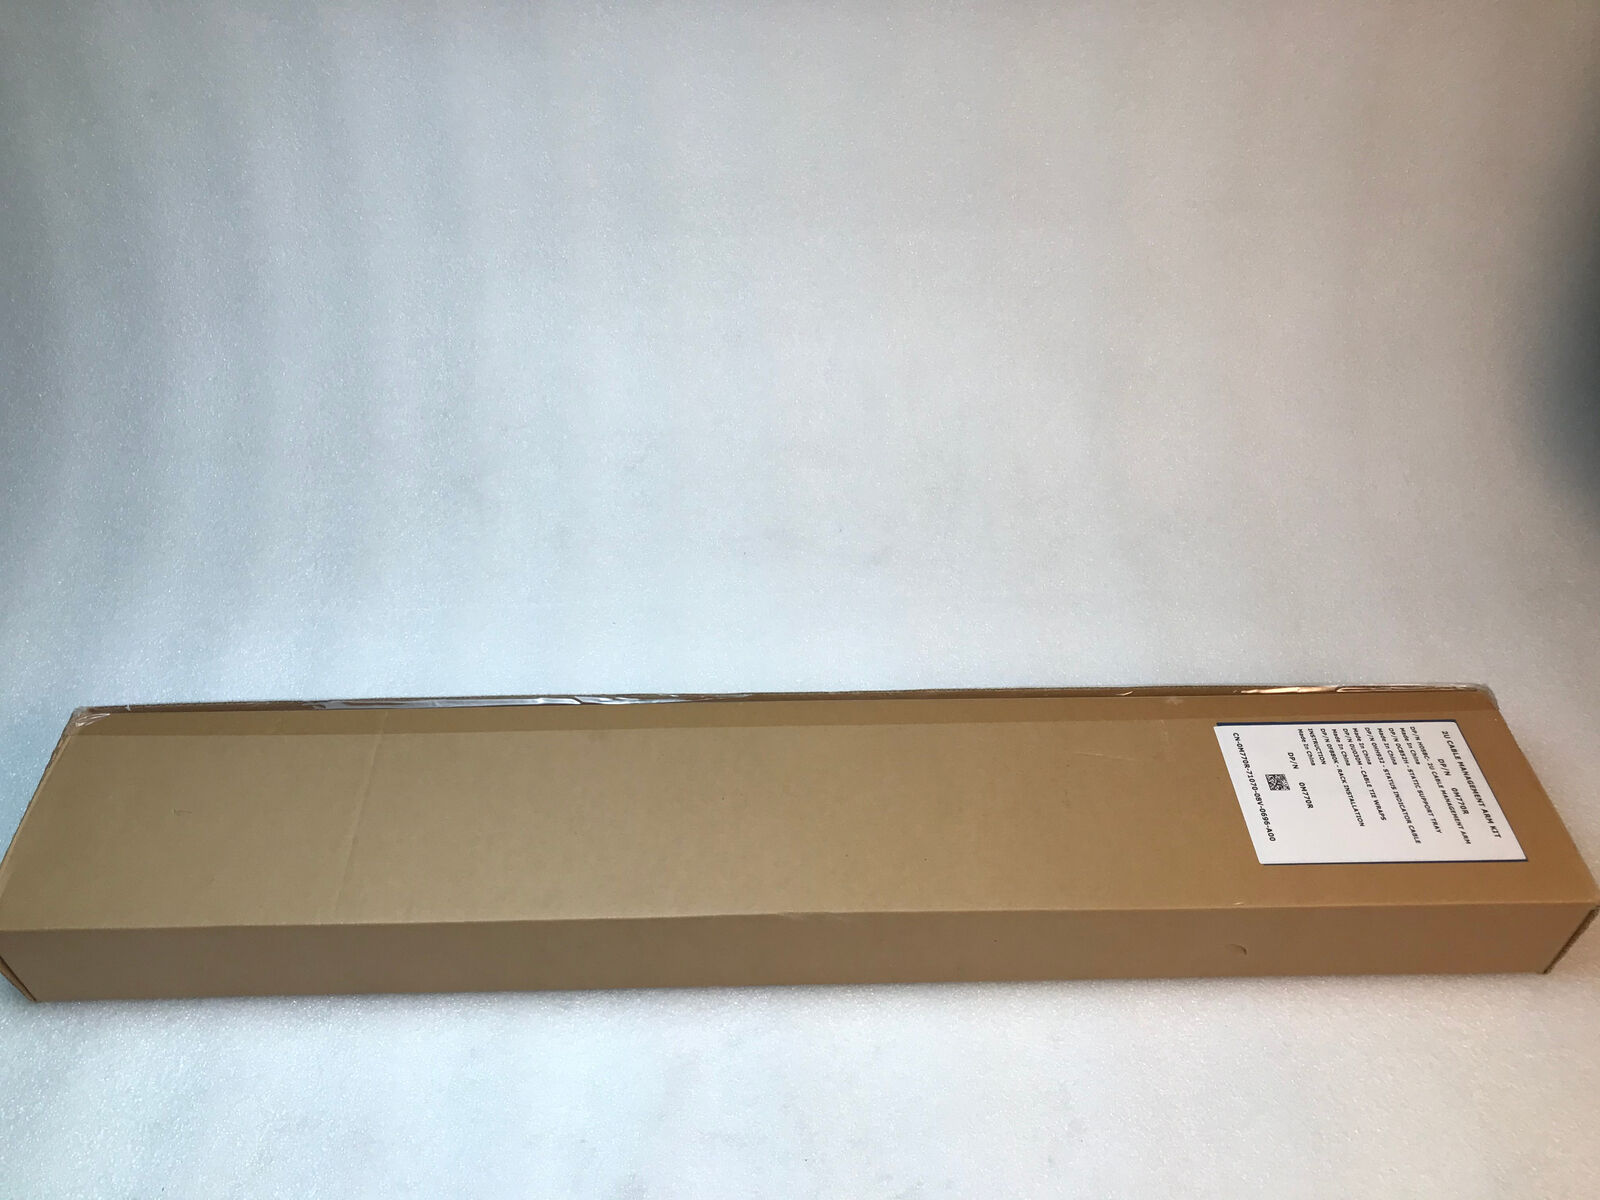 Dell Power Edge 2U Cable Management Arm Kit DP/N 0M770R Sealed